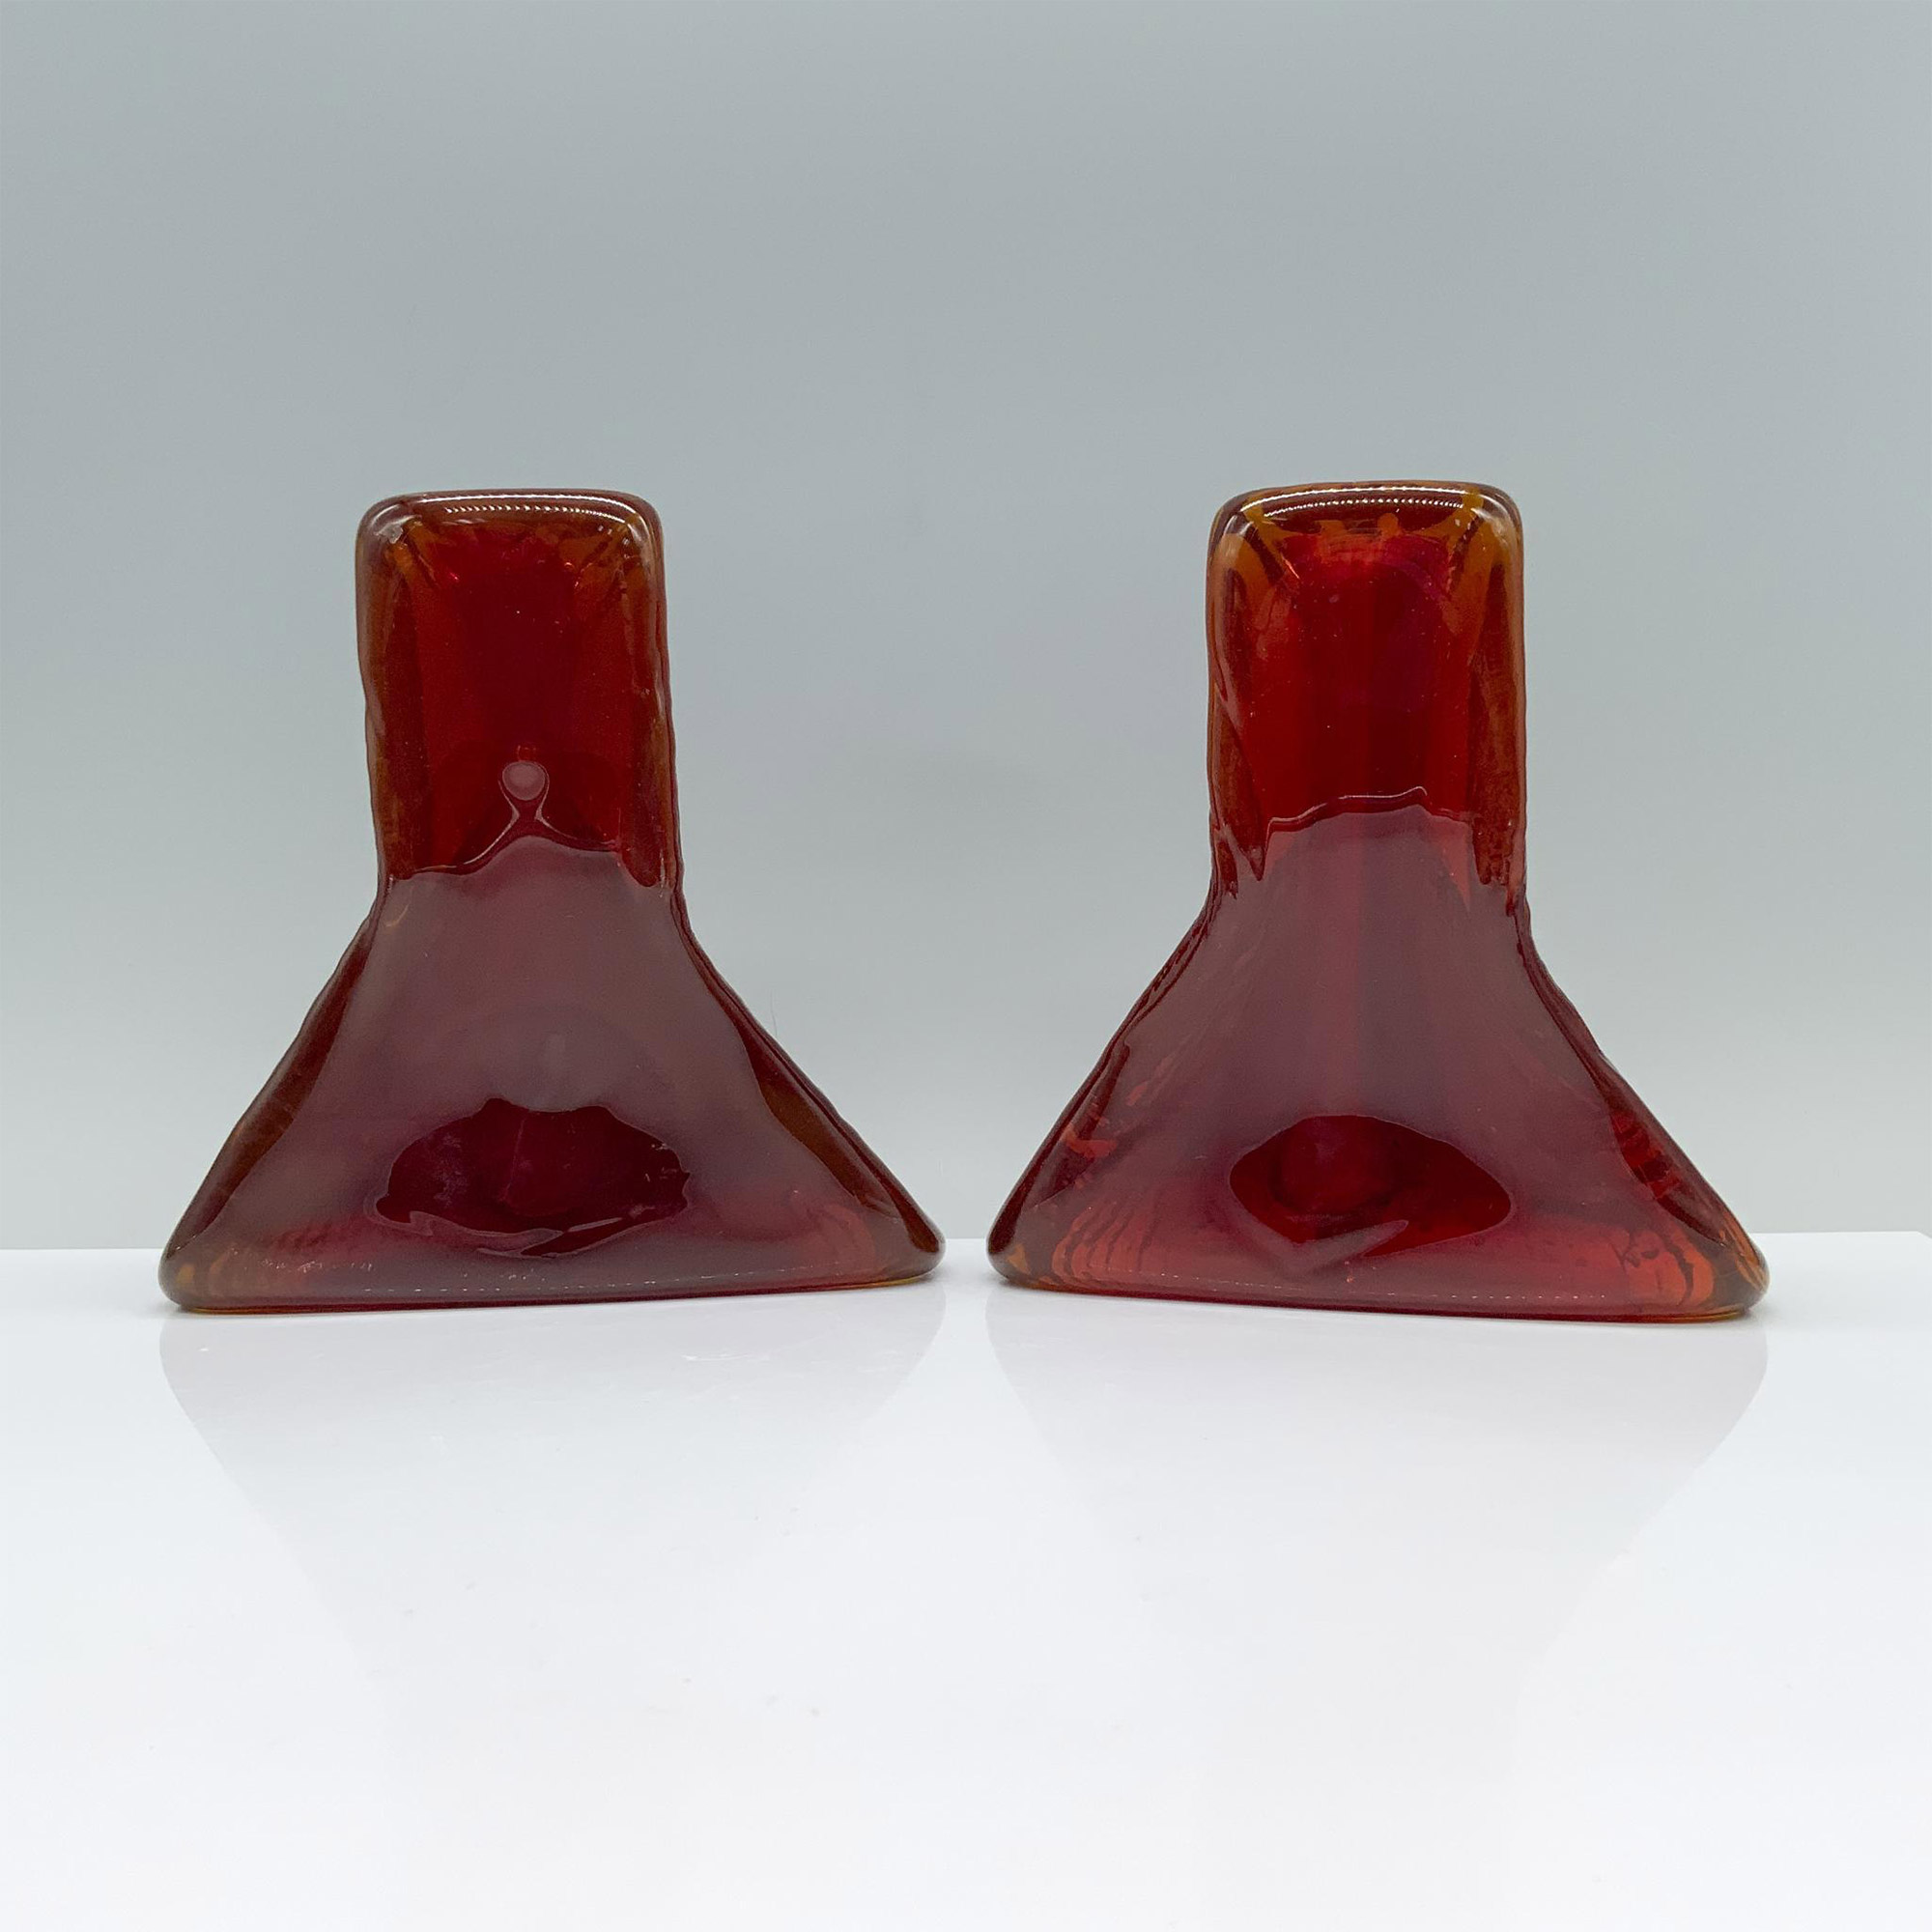 2pc Art Glass Teepee Bookends - Image 2 of 3